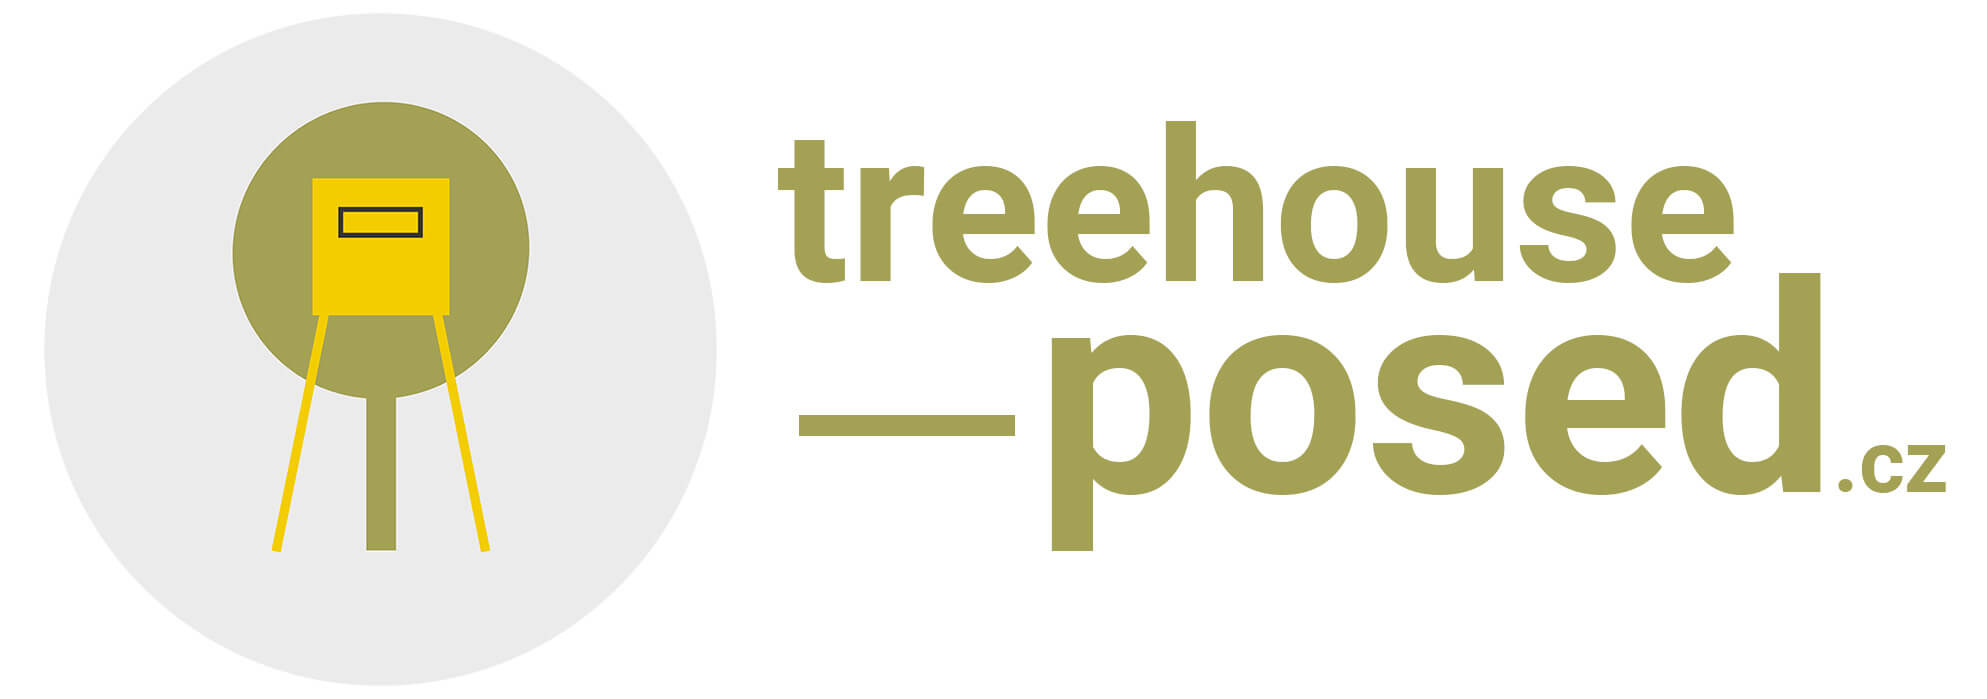 treehouse-posed.cz